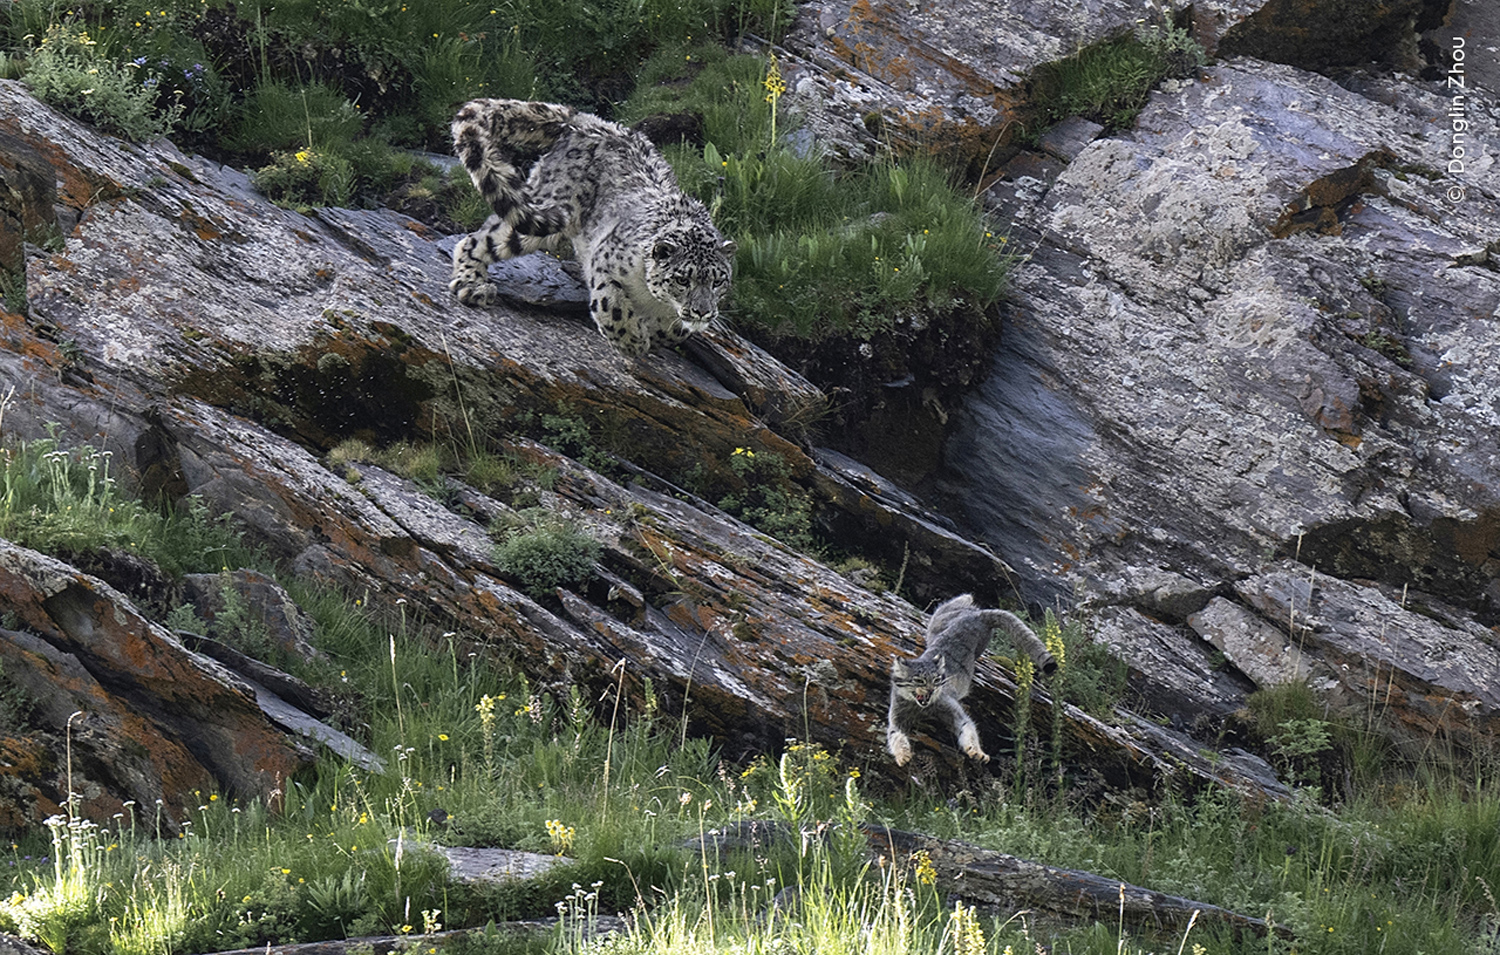 World of the snow leopard, Wildlife Photographer of the Year